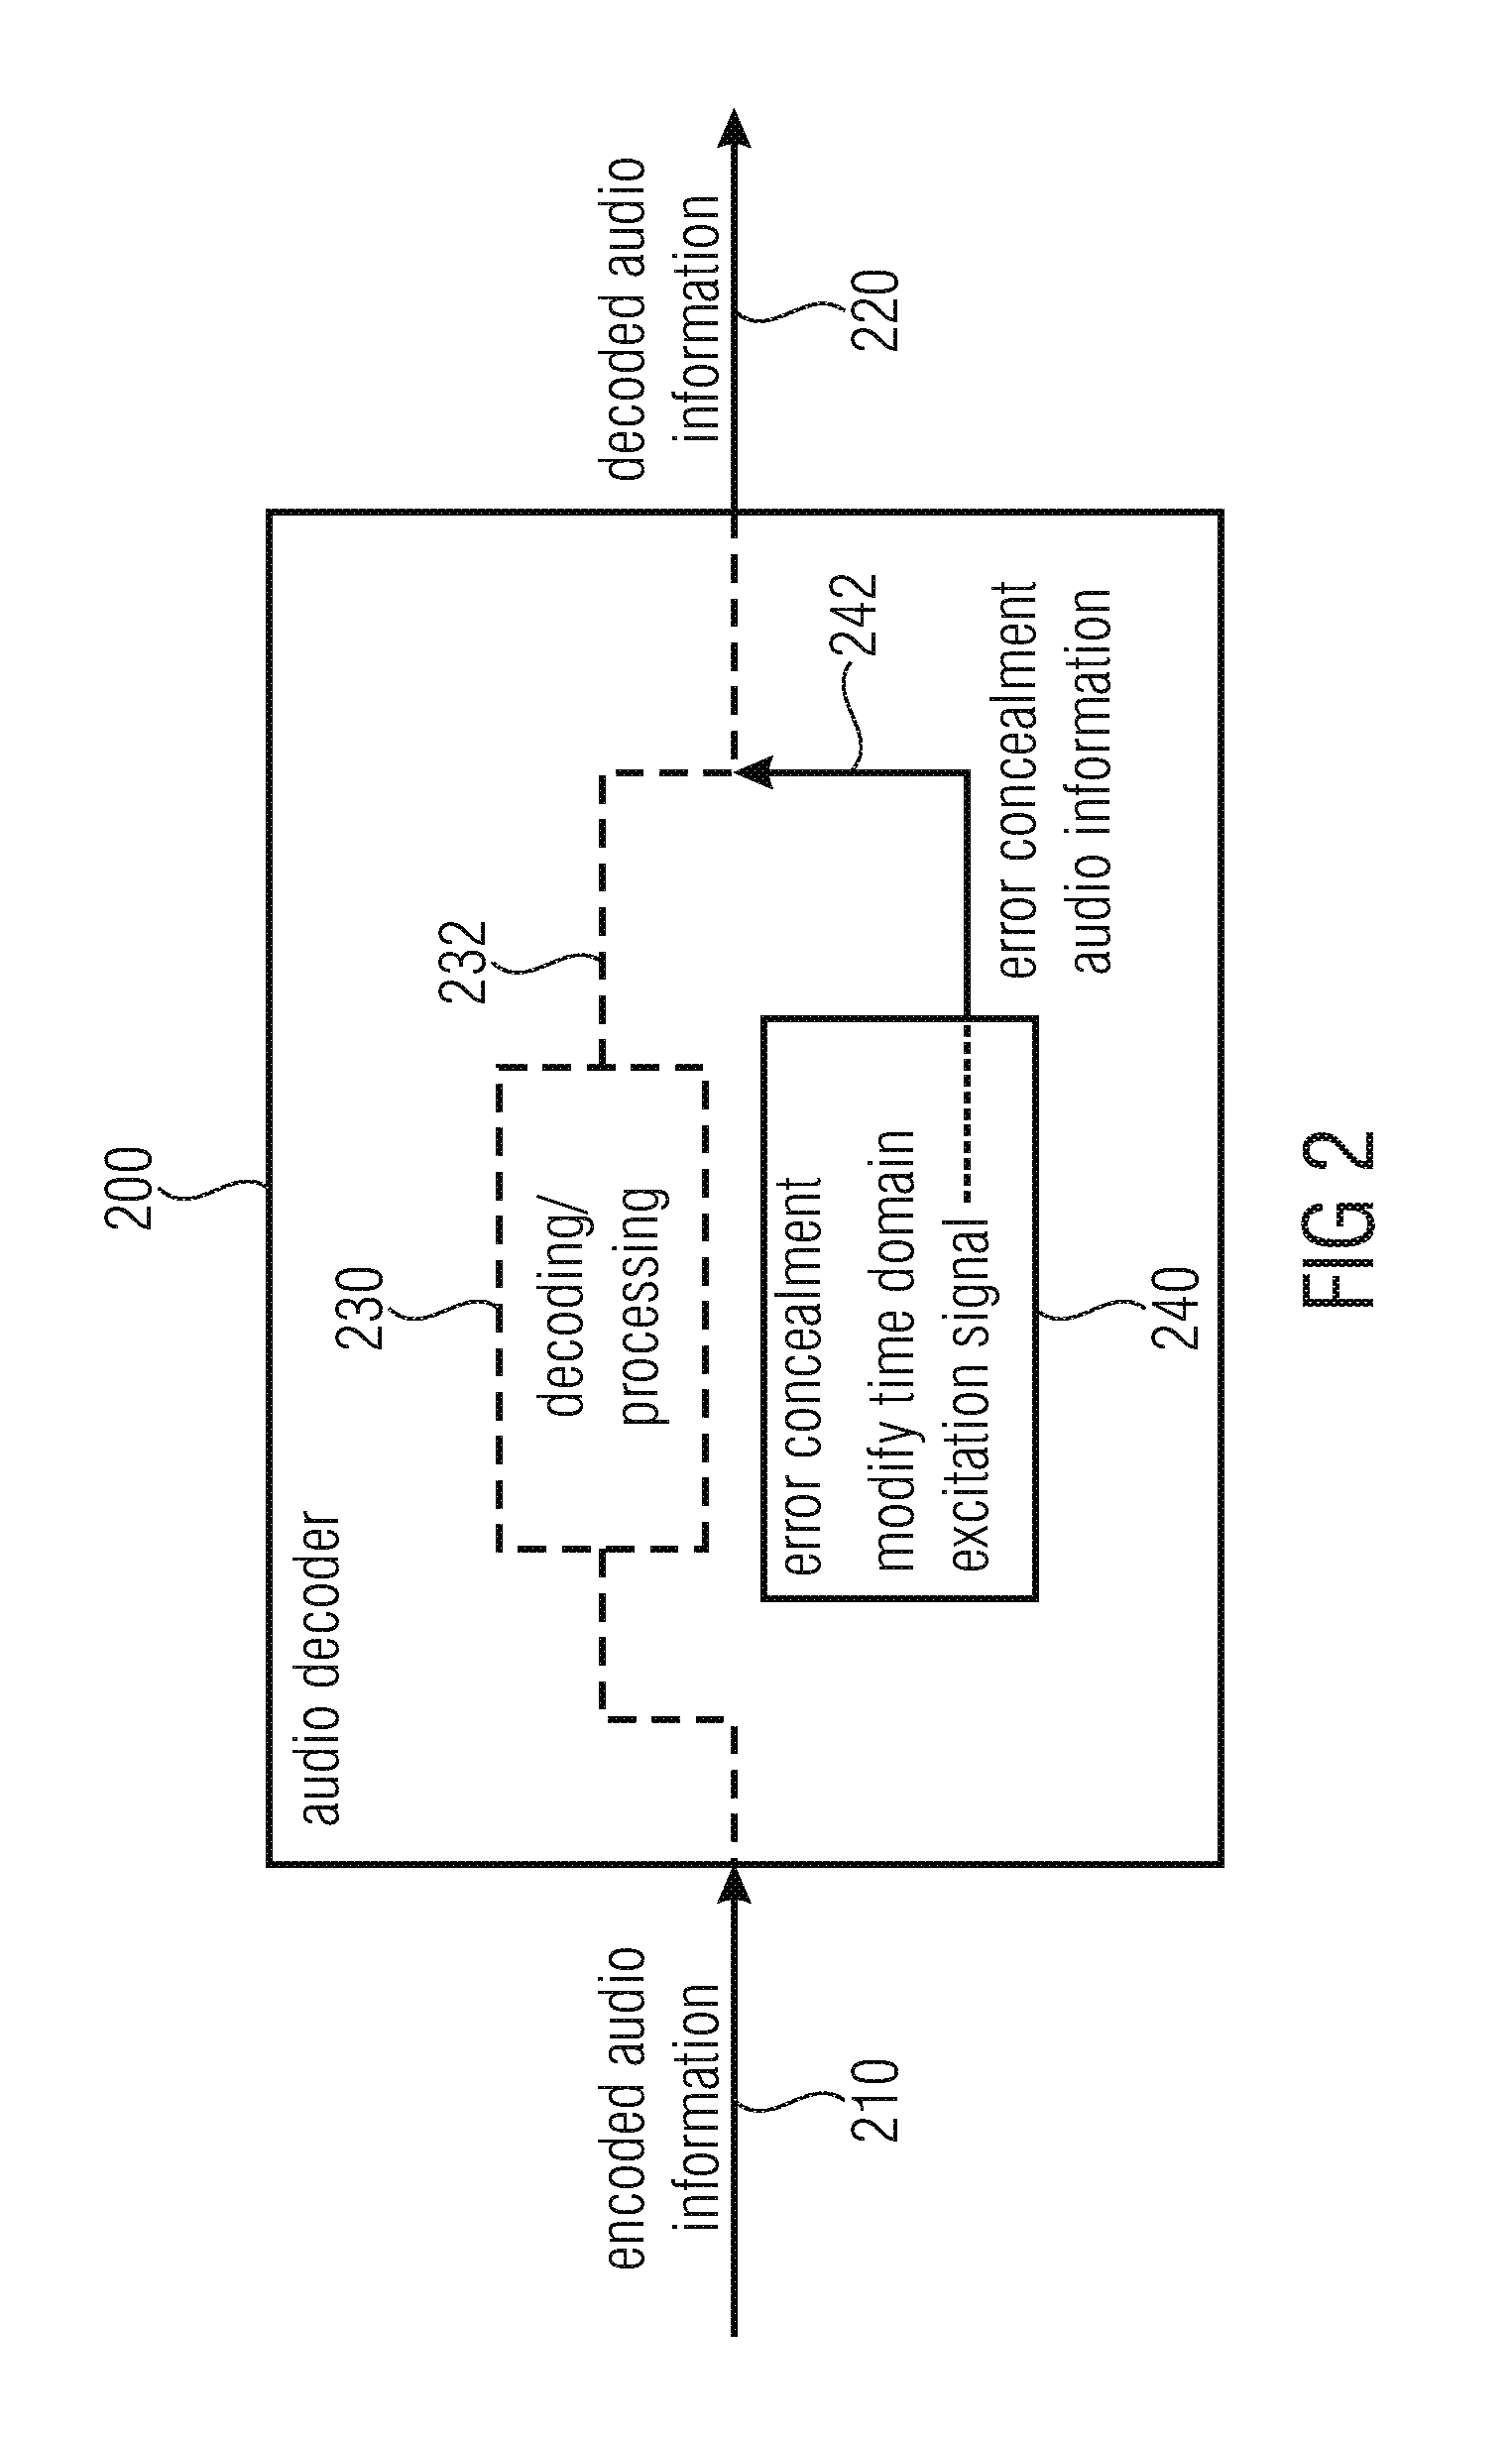 Audio decoder and method for providing a decoded audio information using an error concealment based on a time domain excitation signal